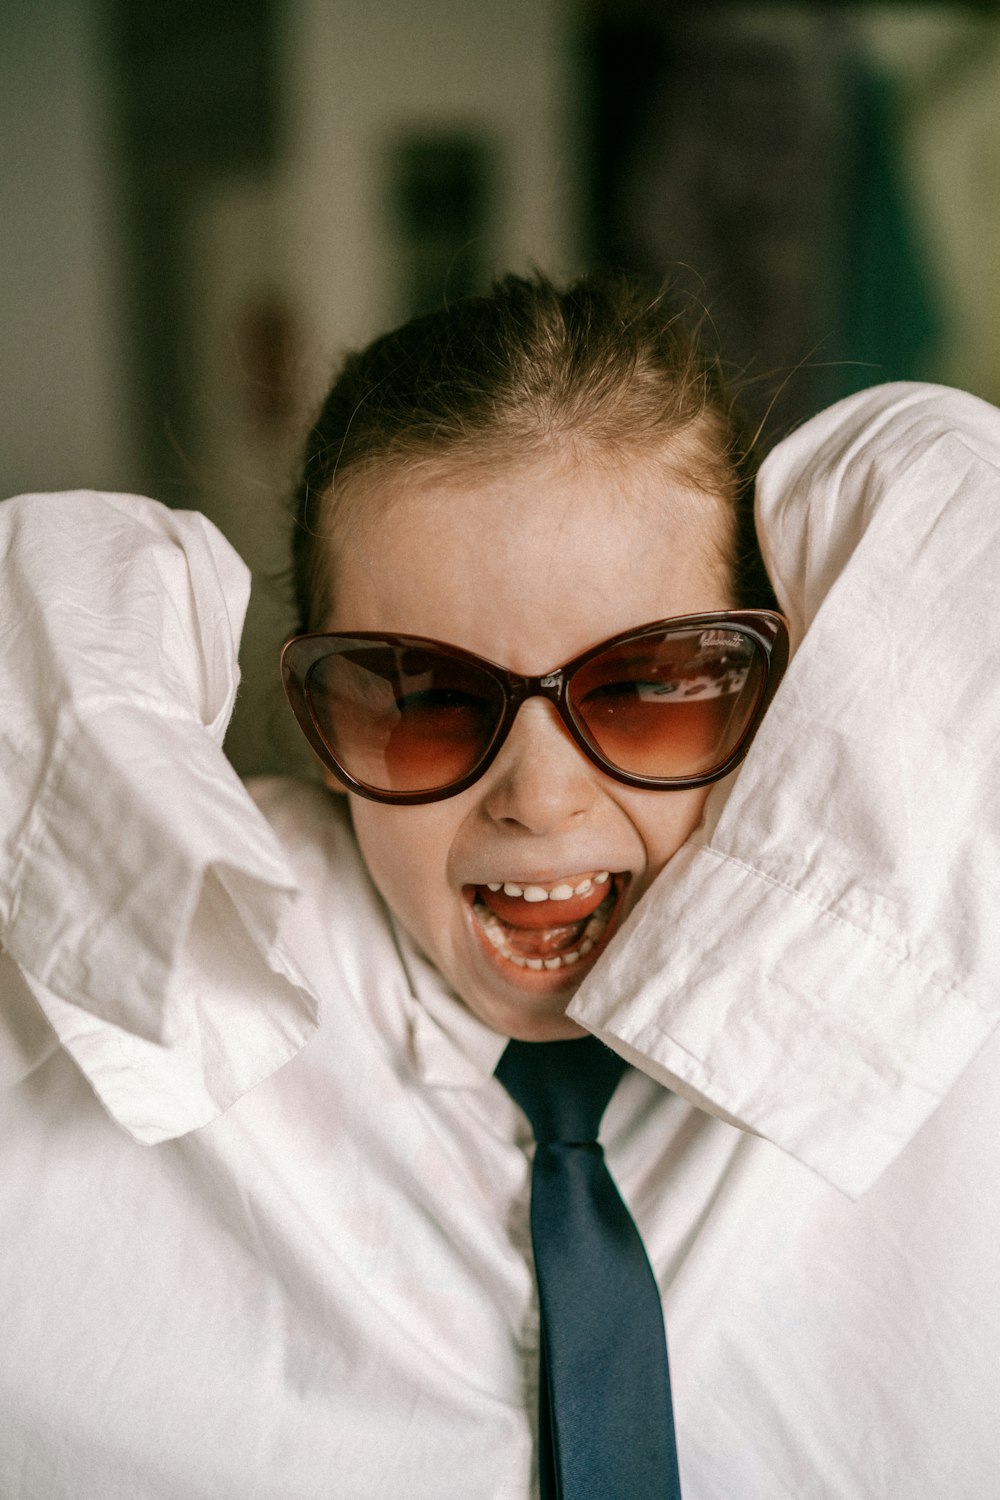 a woman wearing sunglasses and a tie covering her face